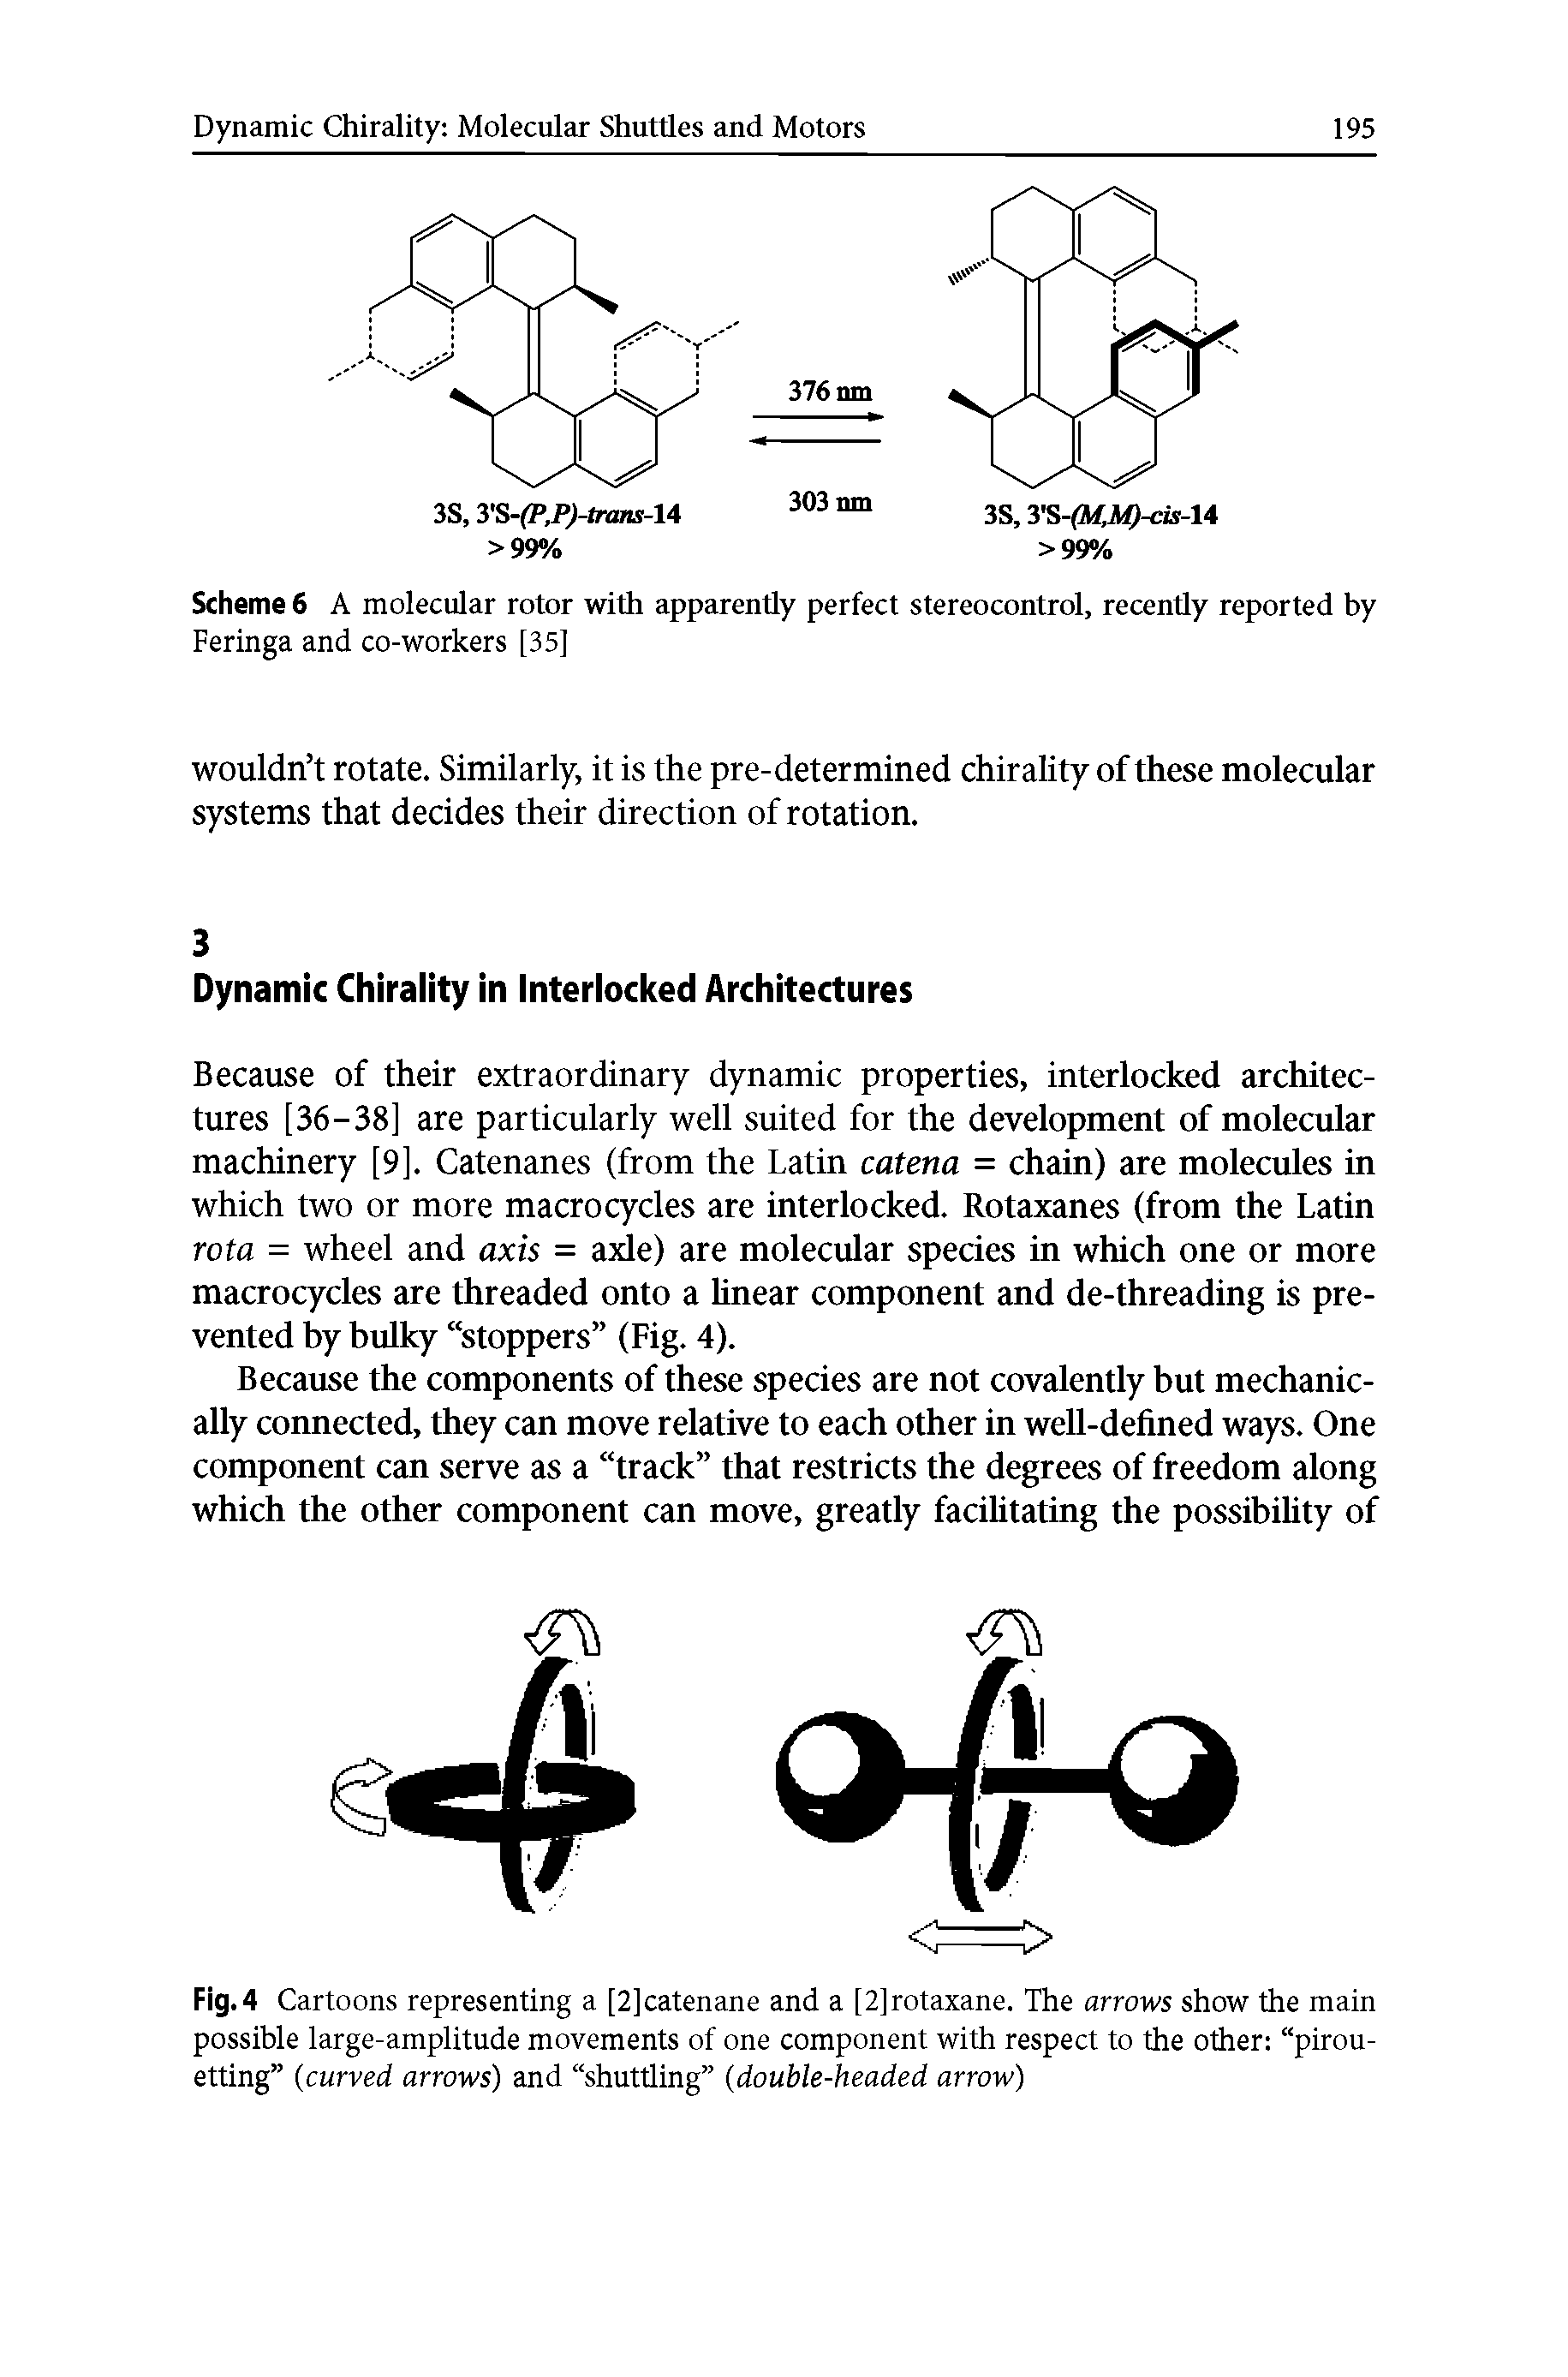 Fig. 4 Cartoons representing a [2]catenane and a [2]rotaxane. The arrows show the main possible large-amplitude movements of one component with respect to the other pirouetting (curved arrows) and shuttling (double-headed arrow)...